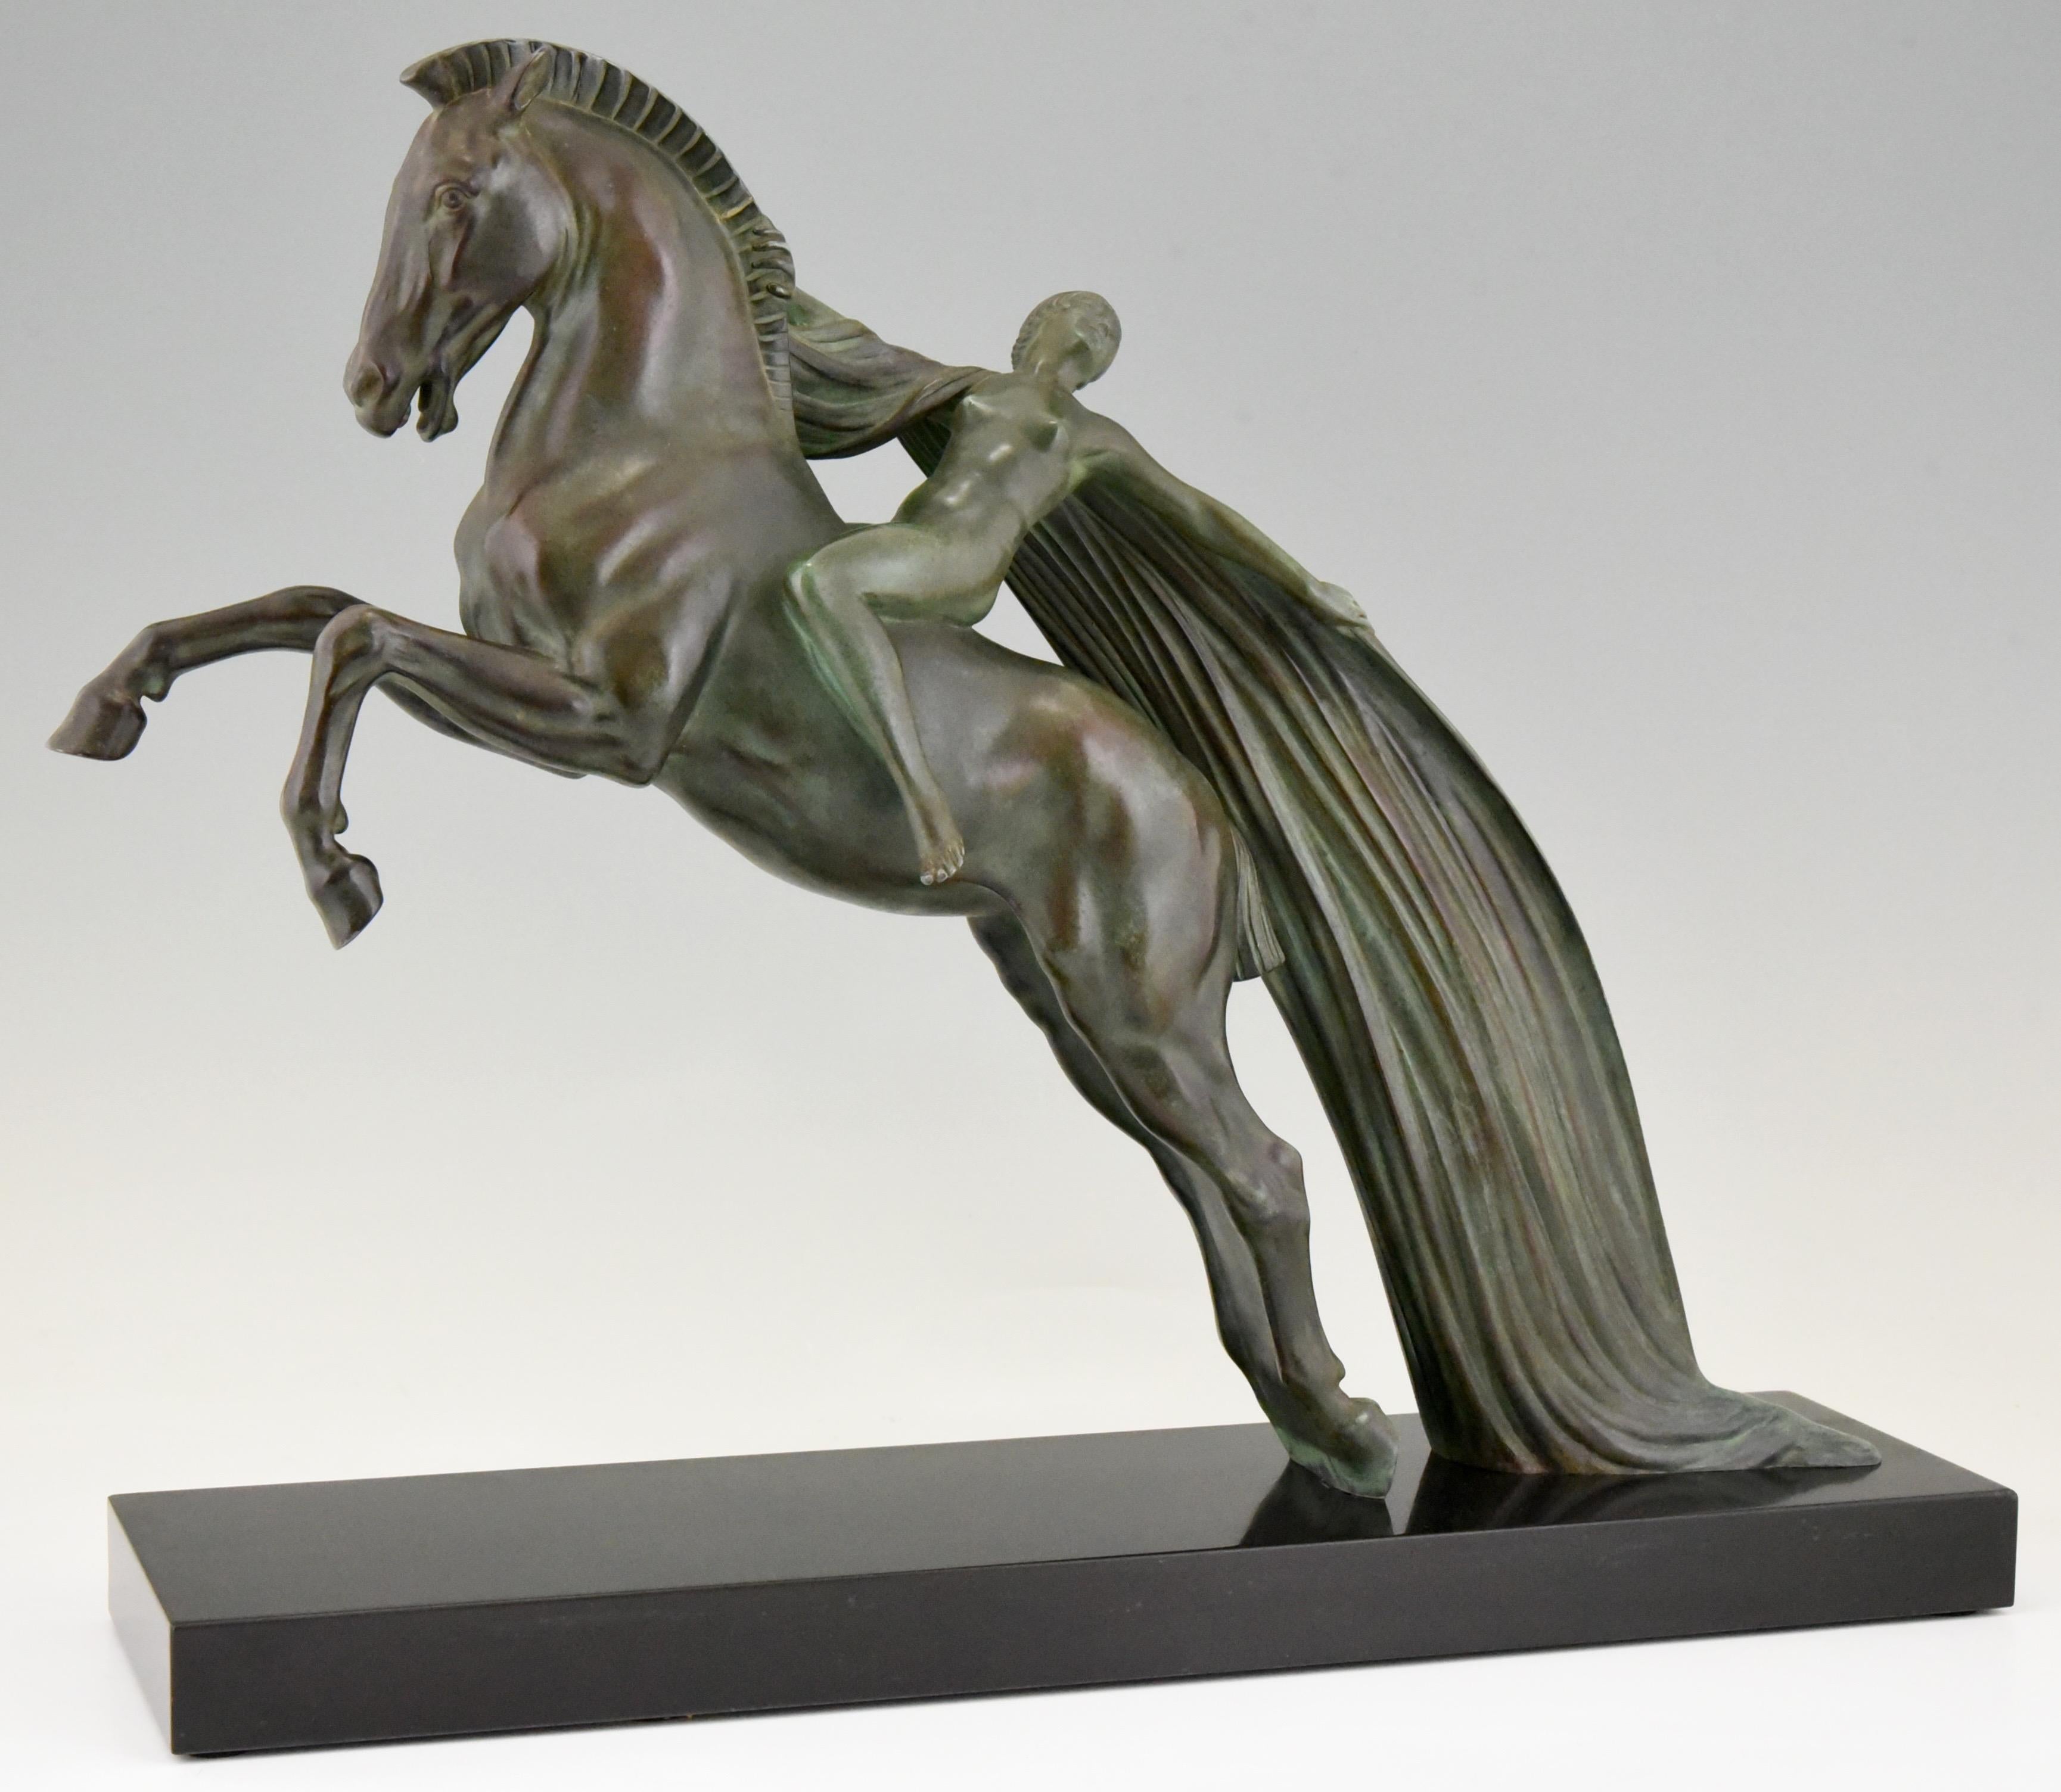 Spectacular Art Deco sculpture of a nude on a rearing horse by the artist Charles Charles for Max Le Verrier.
France, circa 1930.
Lovely green patina, Belgian black marble base. 

Literature:
“The dictionary of sculptors in bronze” by James